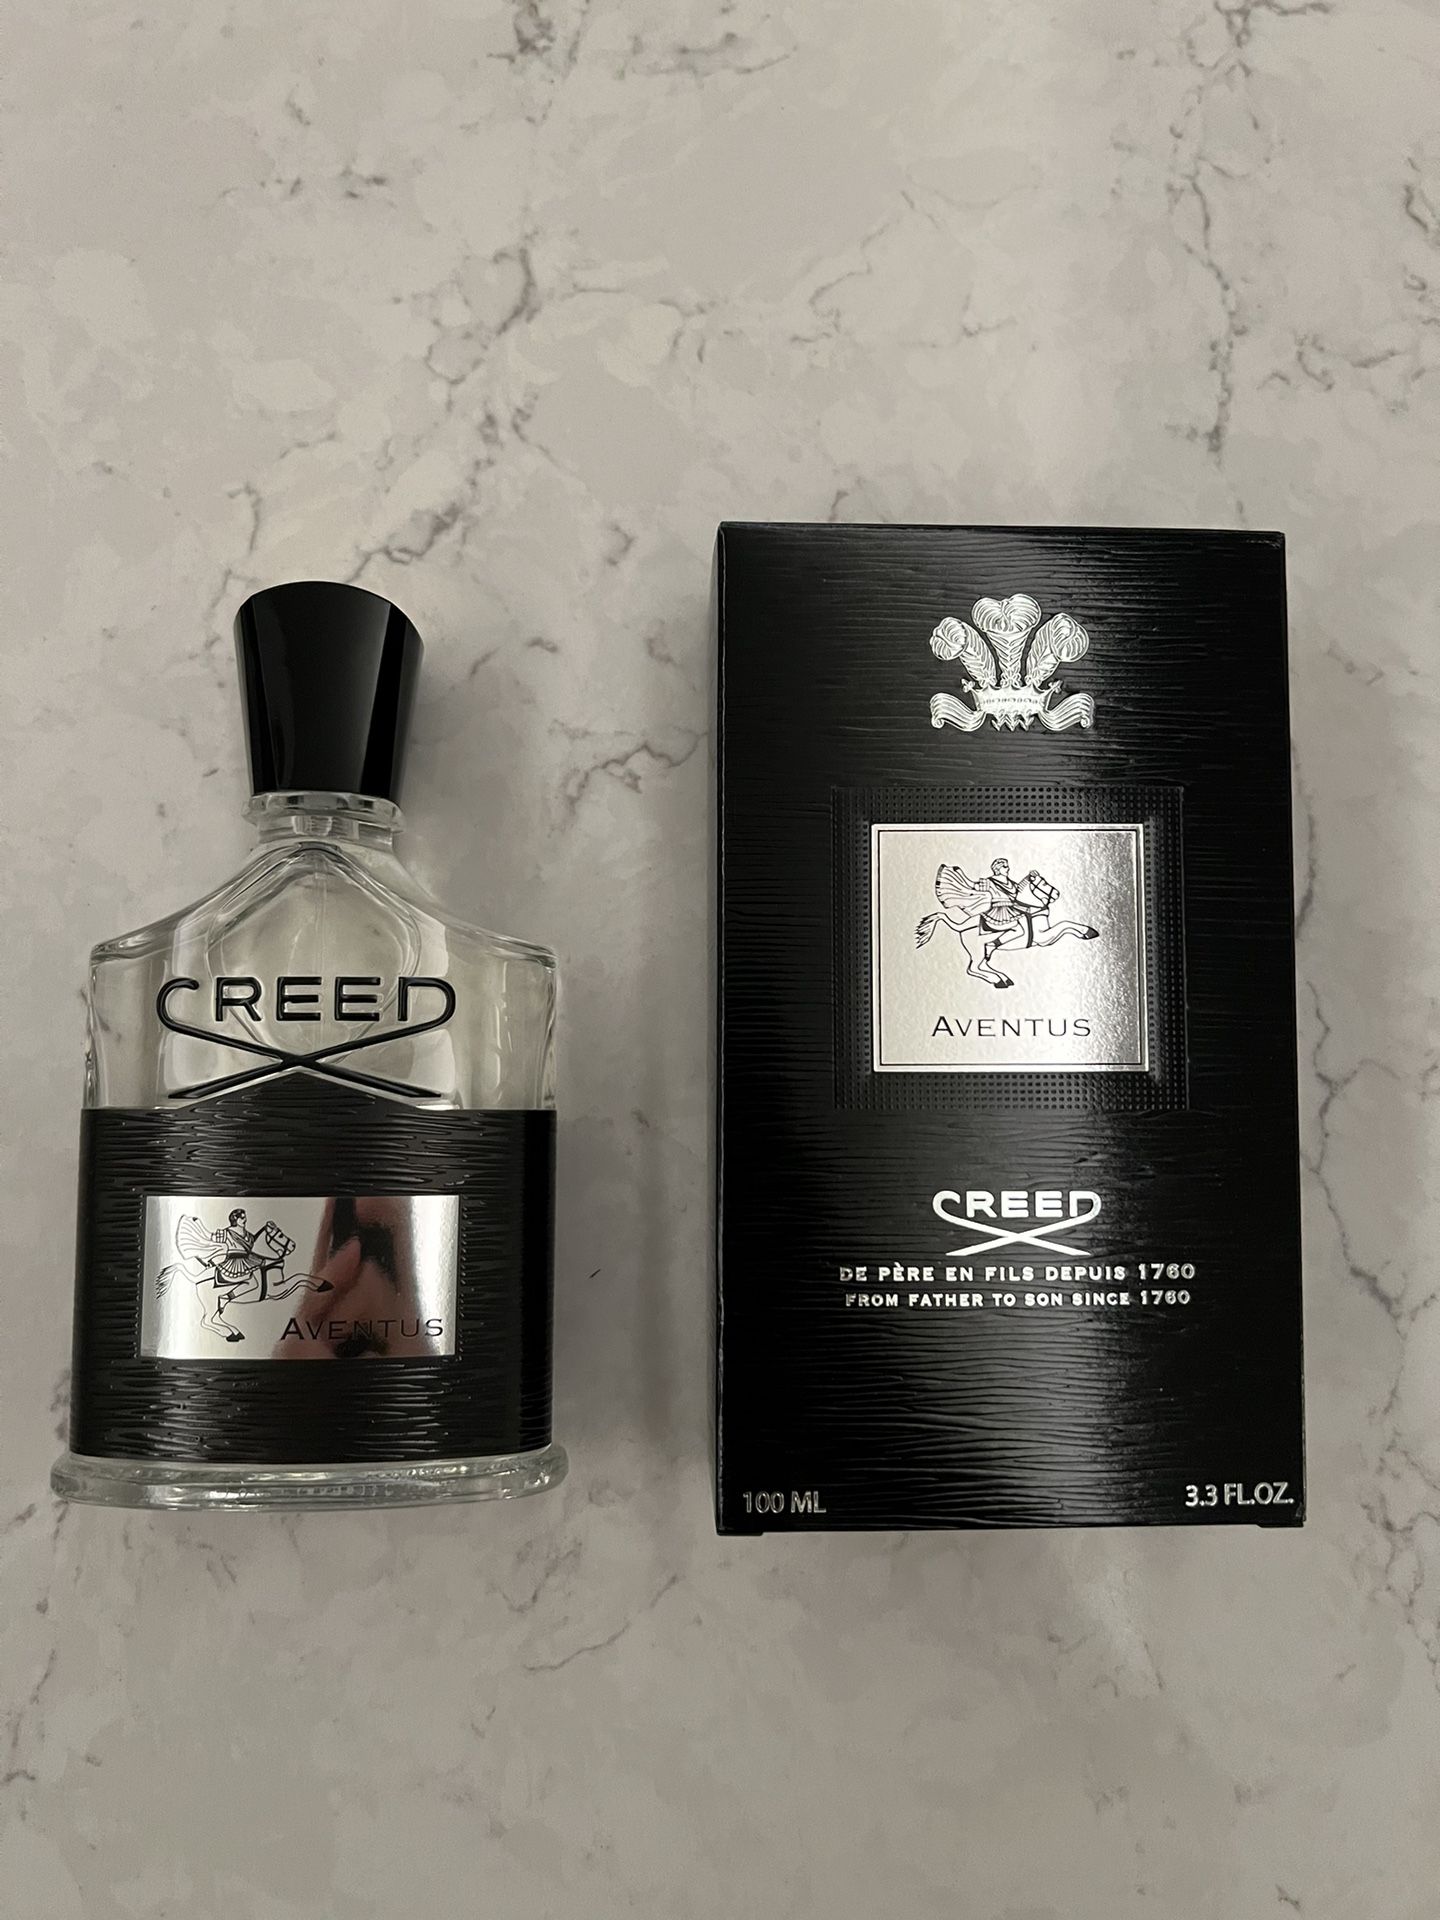 BRAND NEW CREED AVENTUS Cologne 3.3oz 100ml Large Size